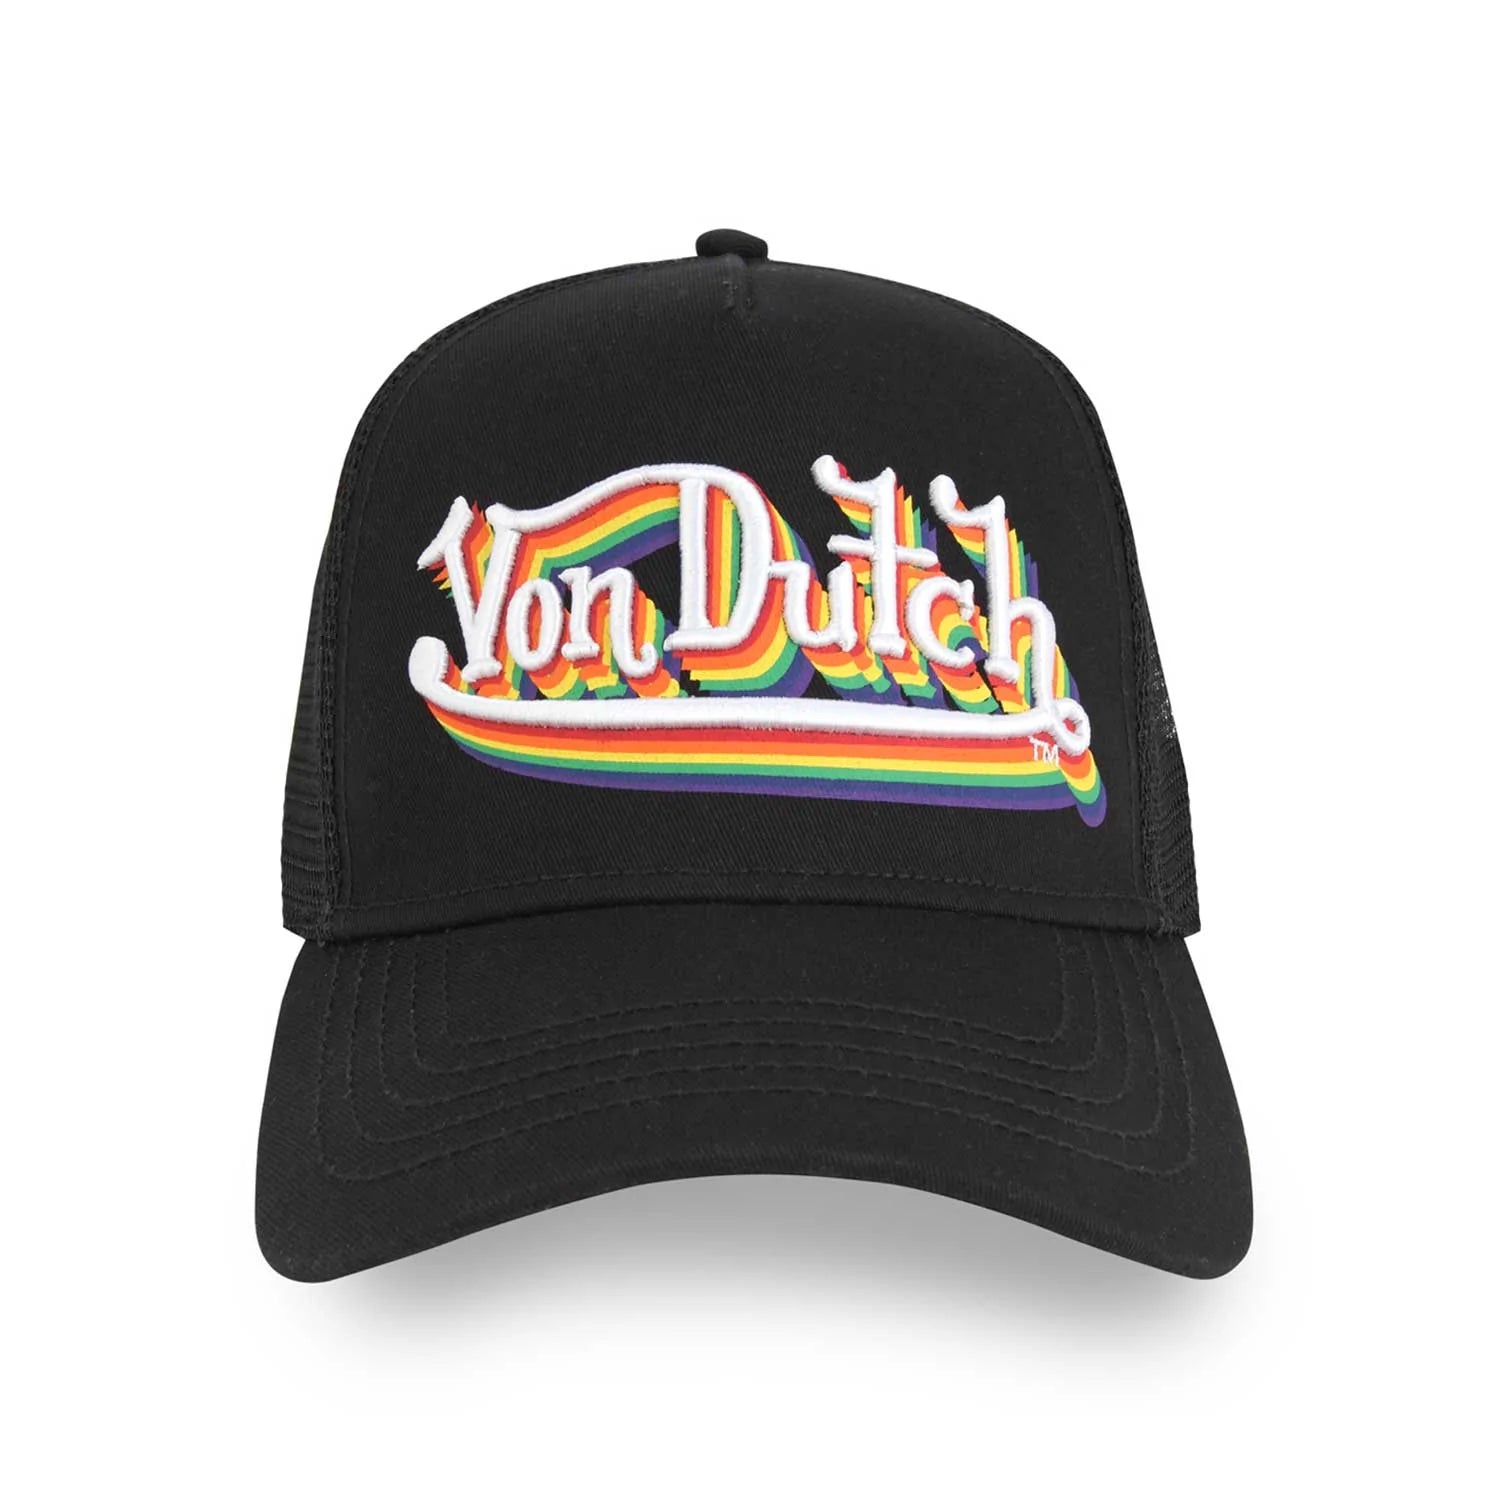 Classic Snapback Trucker Hat by Von Dutch features iconic logo patch on the front, breathable mesh rear, and an adjustable snapback panel